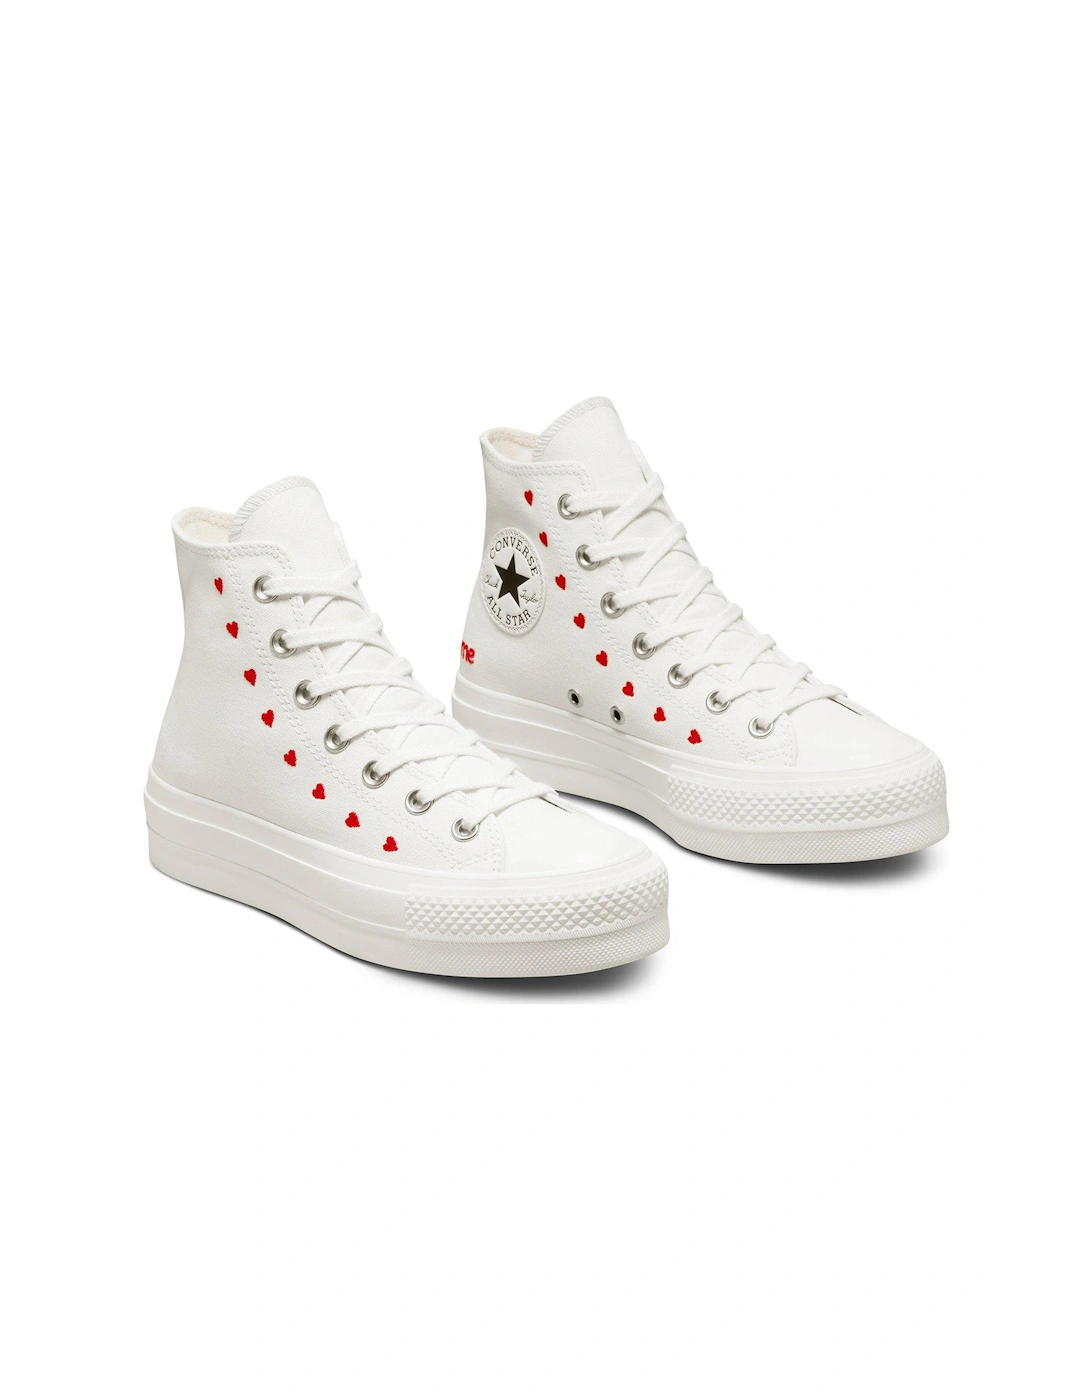 All Star Lift Hi Top Plimsolls - White/Red, 2 of 1